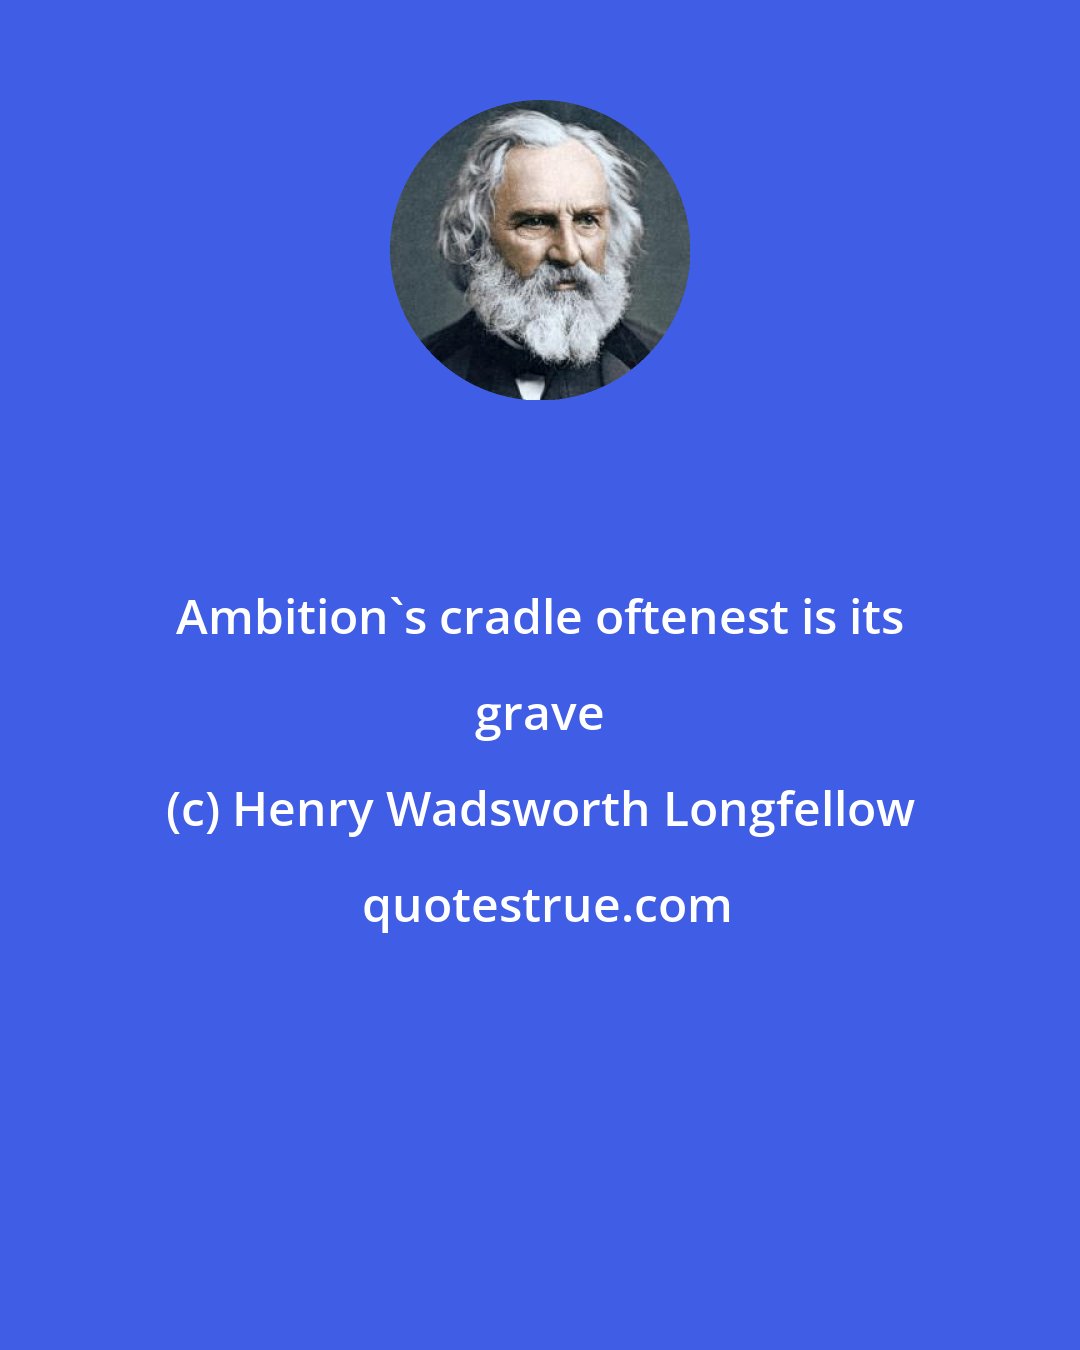 Henry Wadsworth Longfellow: Ambition's cradle oftenest is its grave